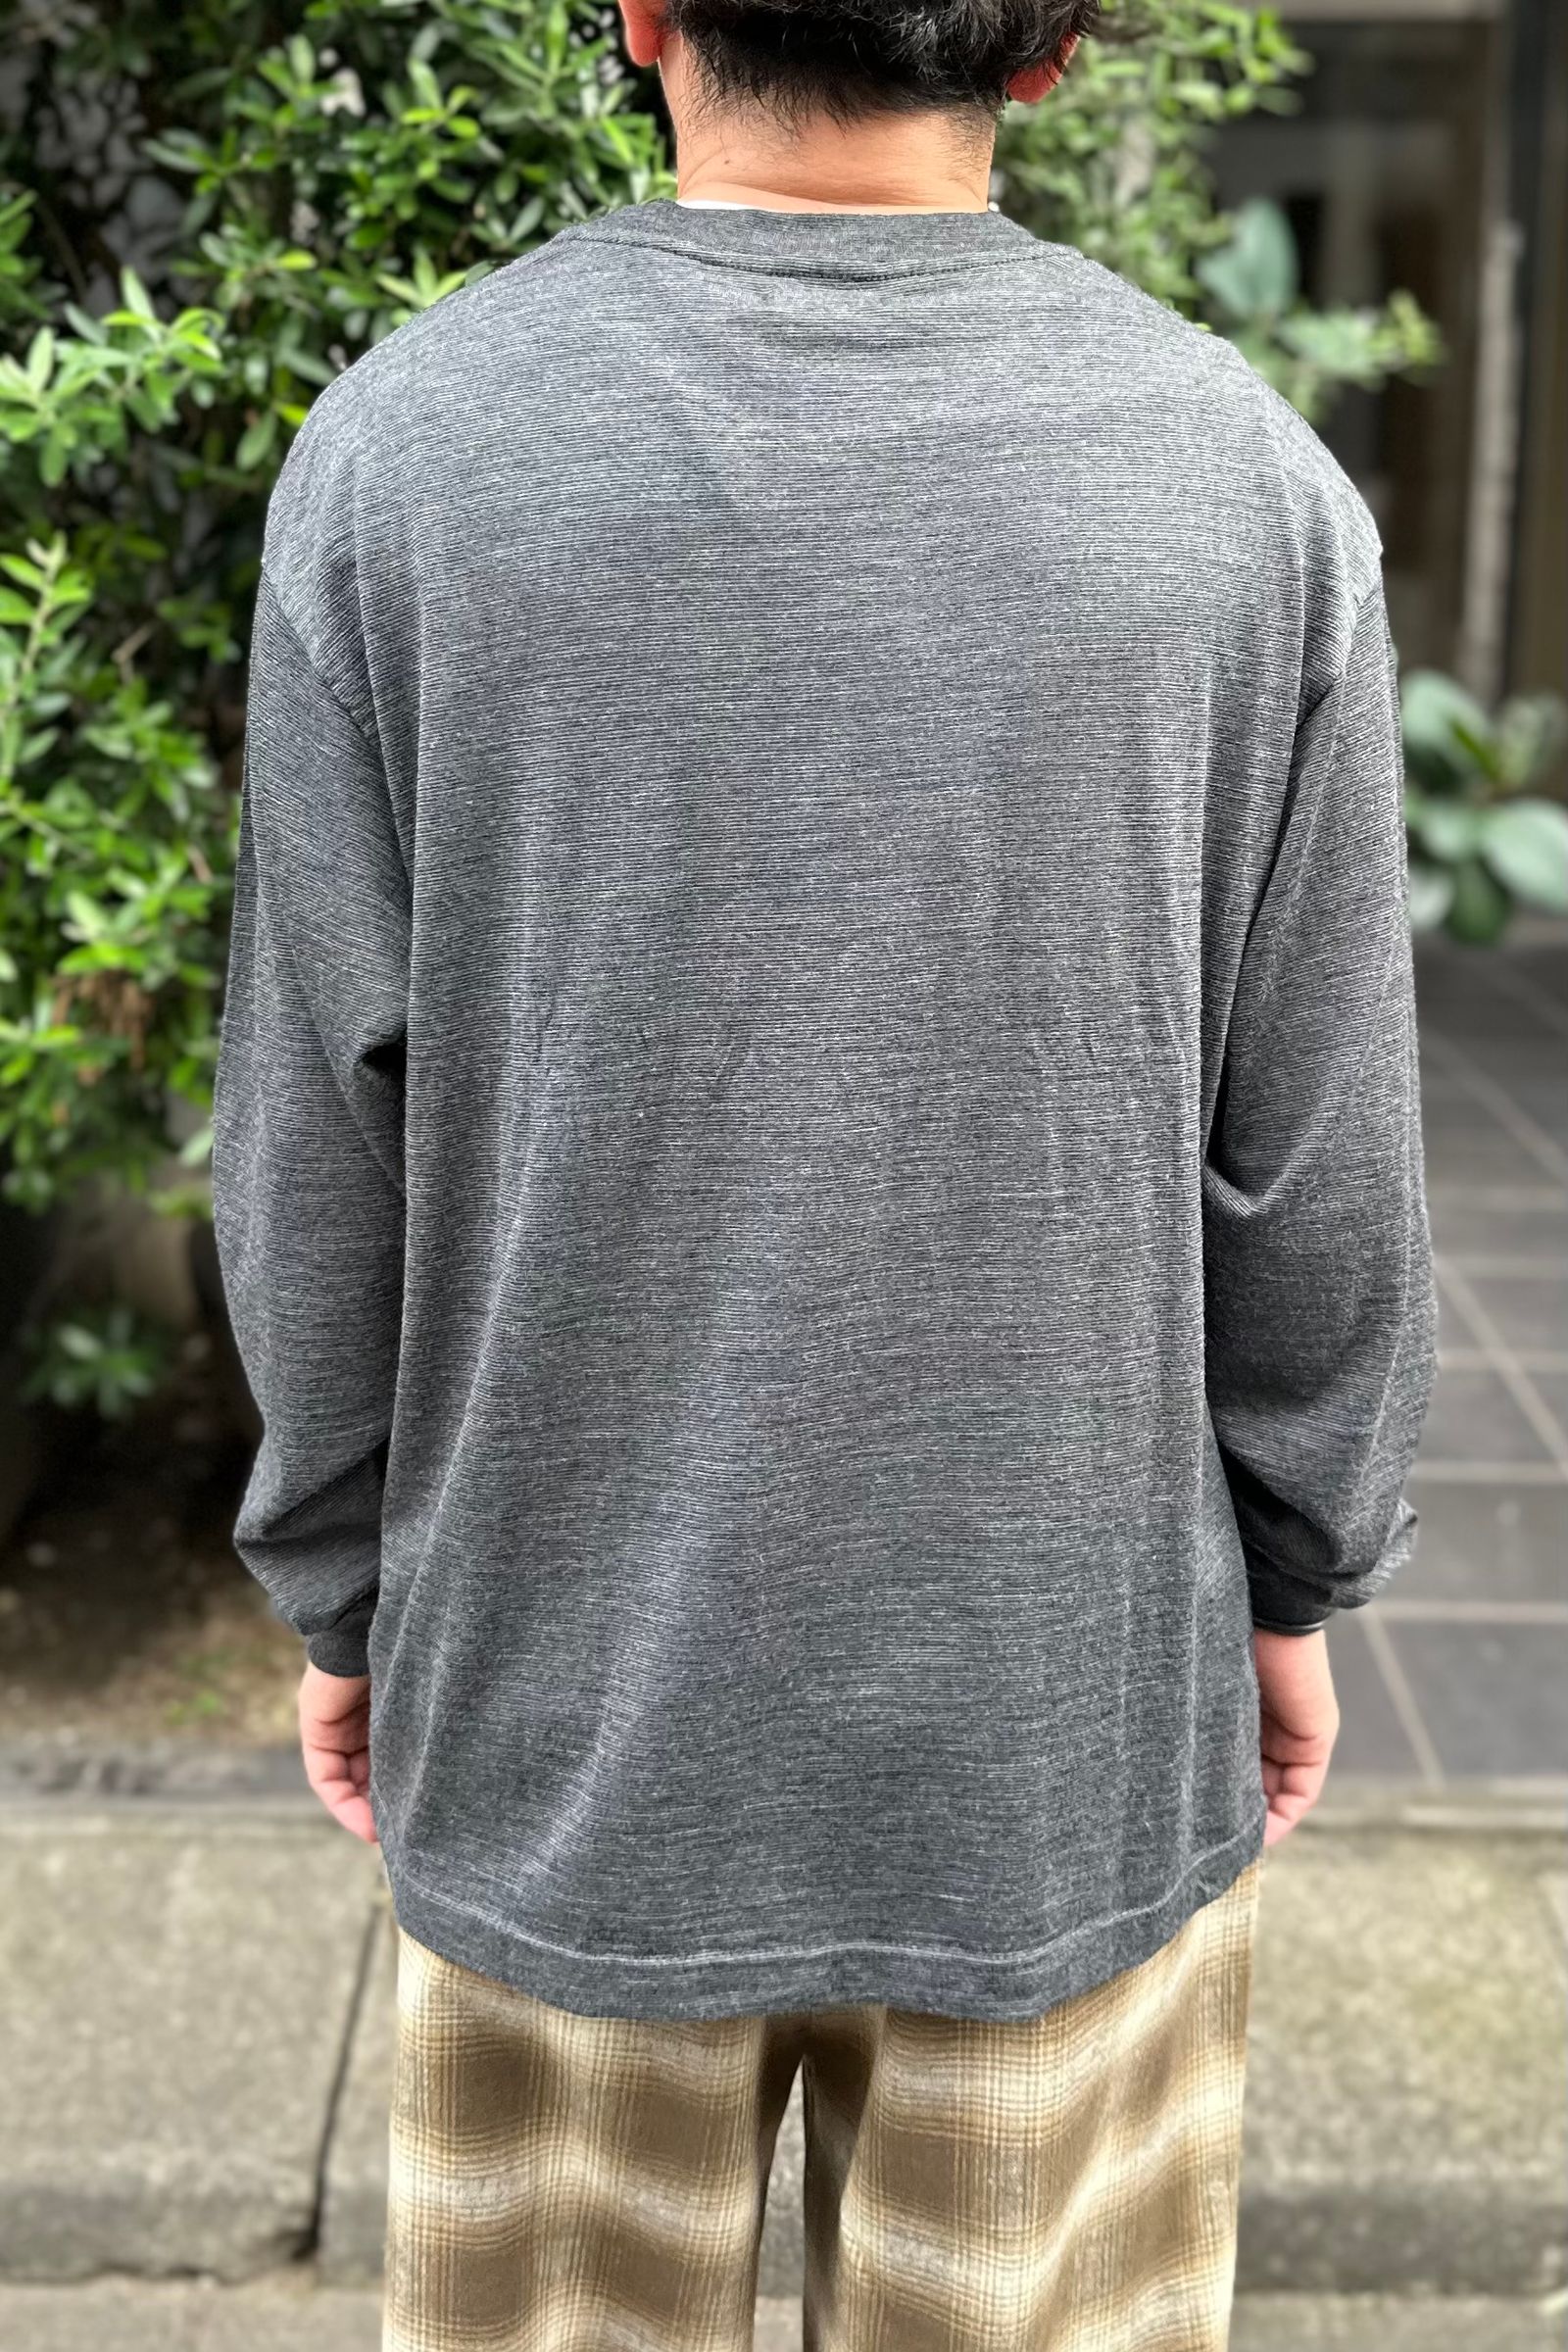 UNIVERSAL PRODUCTS - WOOL L/S T-SHIRT -gray- 23aw | asterisk